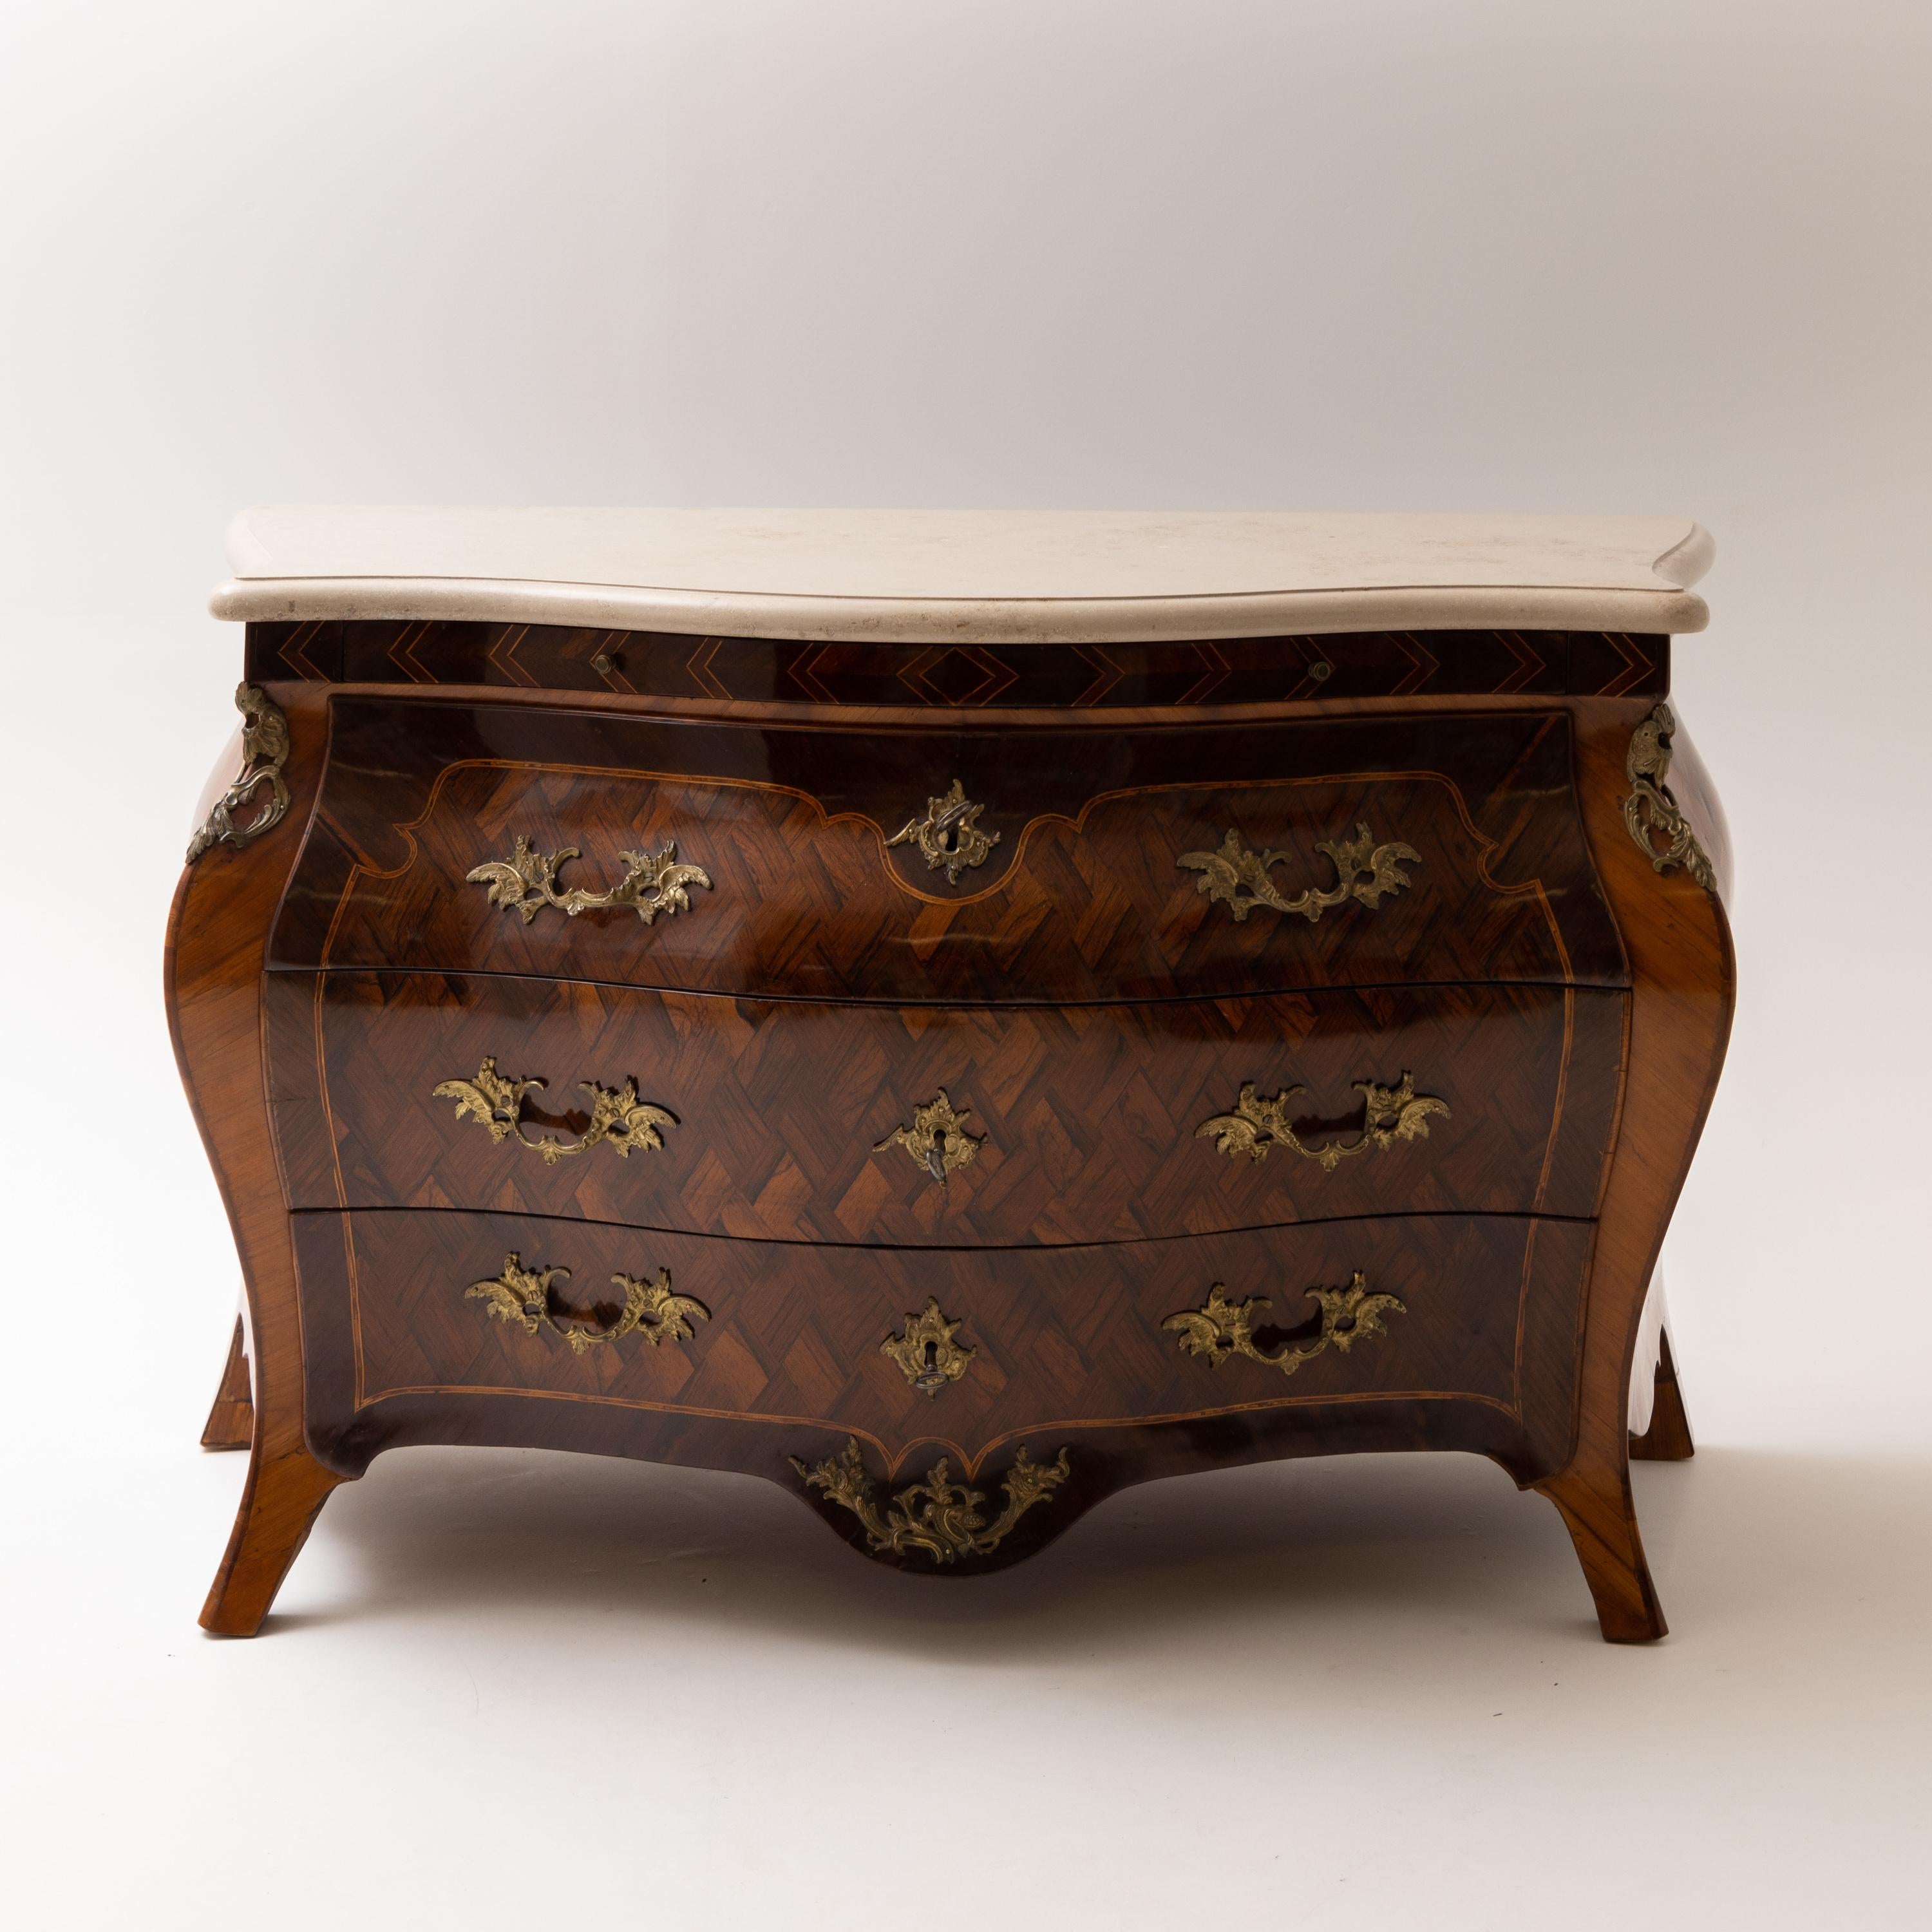 Baroque Revival Baroque Chest of Drawers, Niclas Korp, Sweden, c. 1775 For Sale